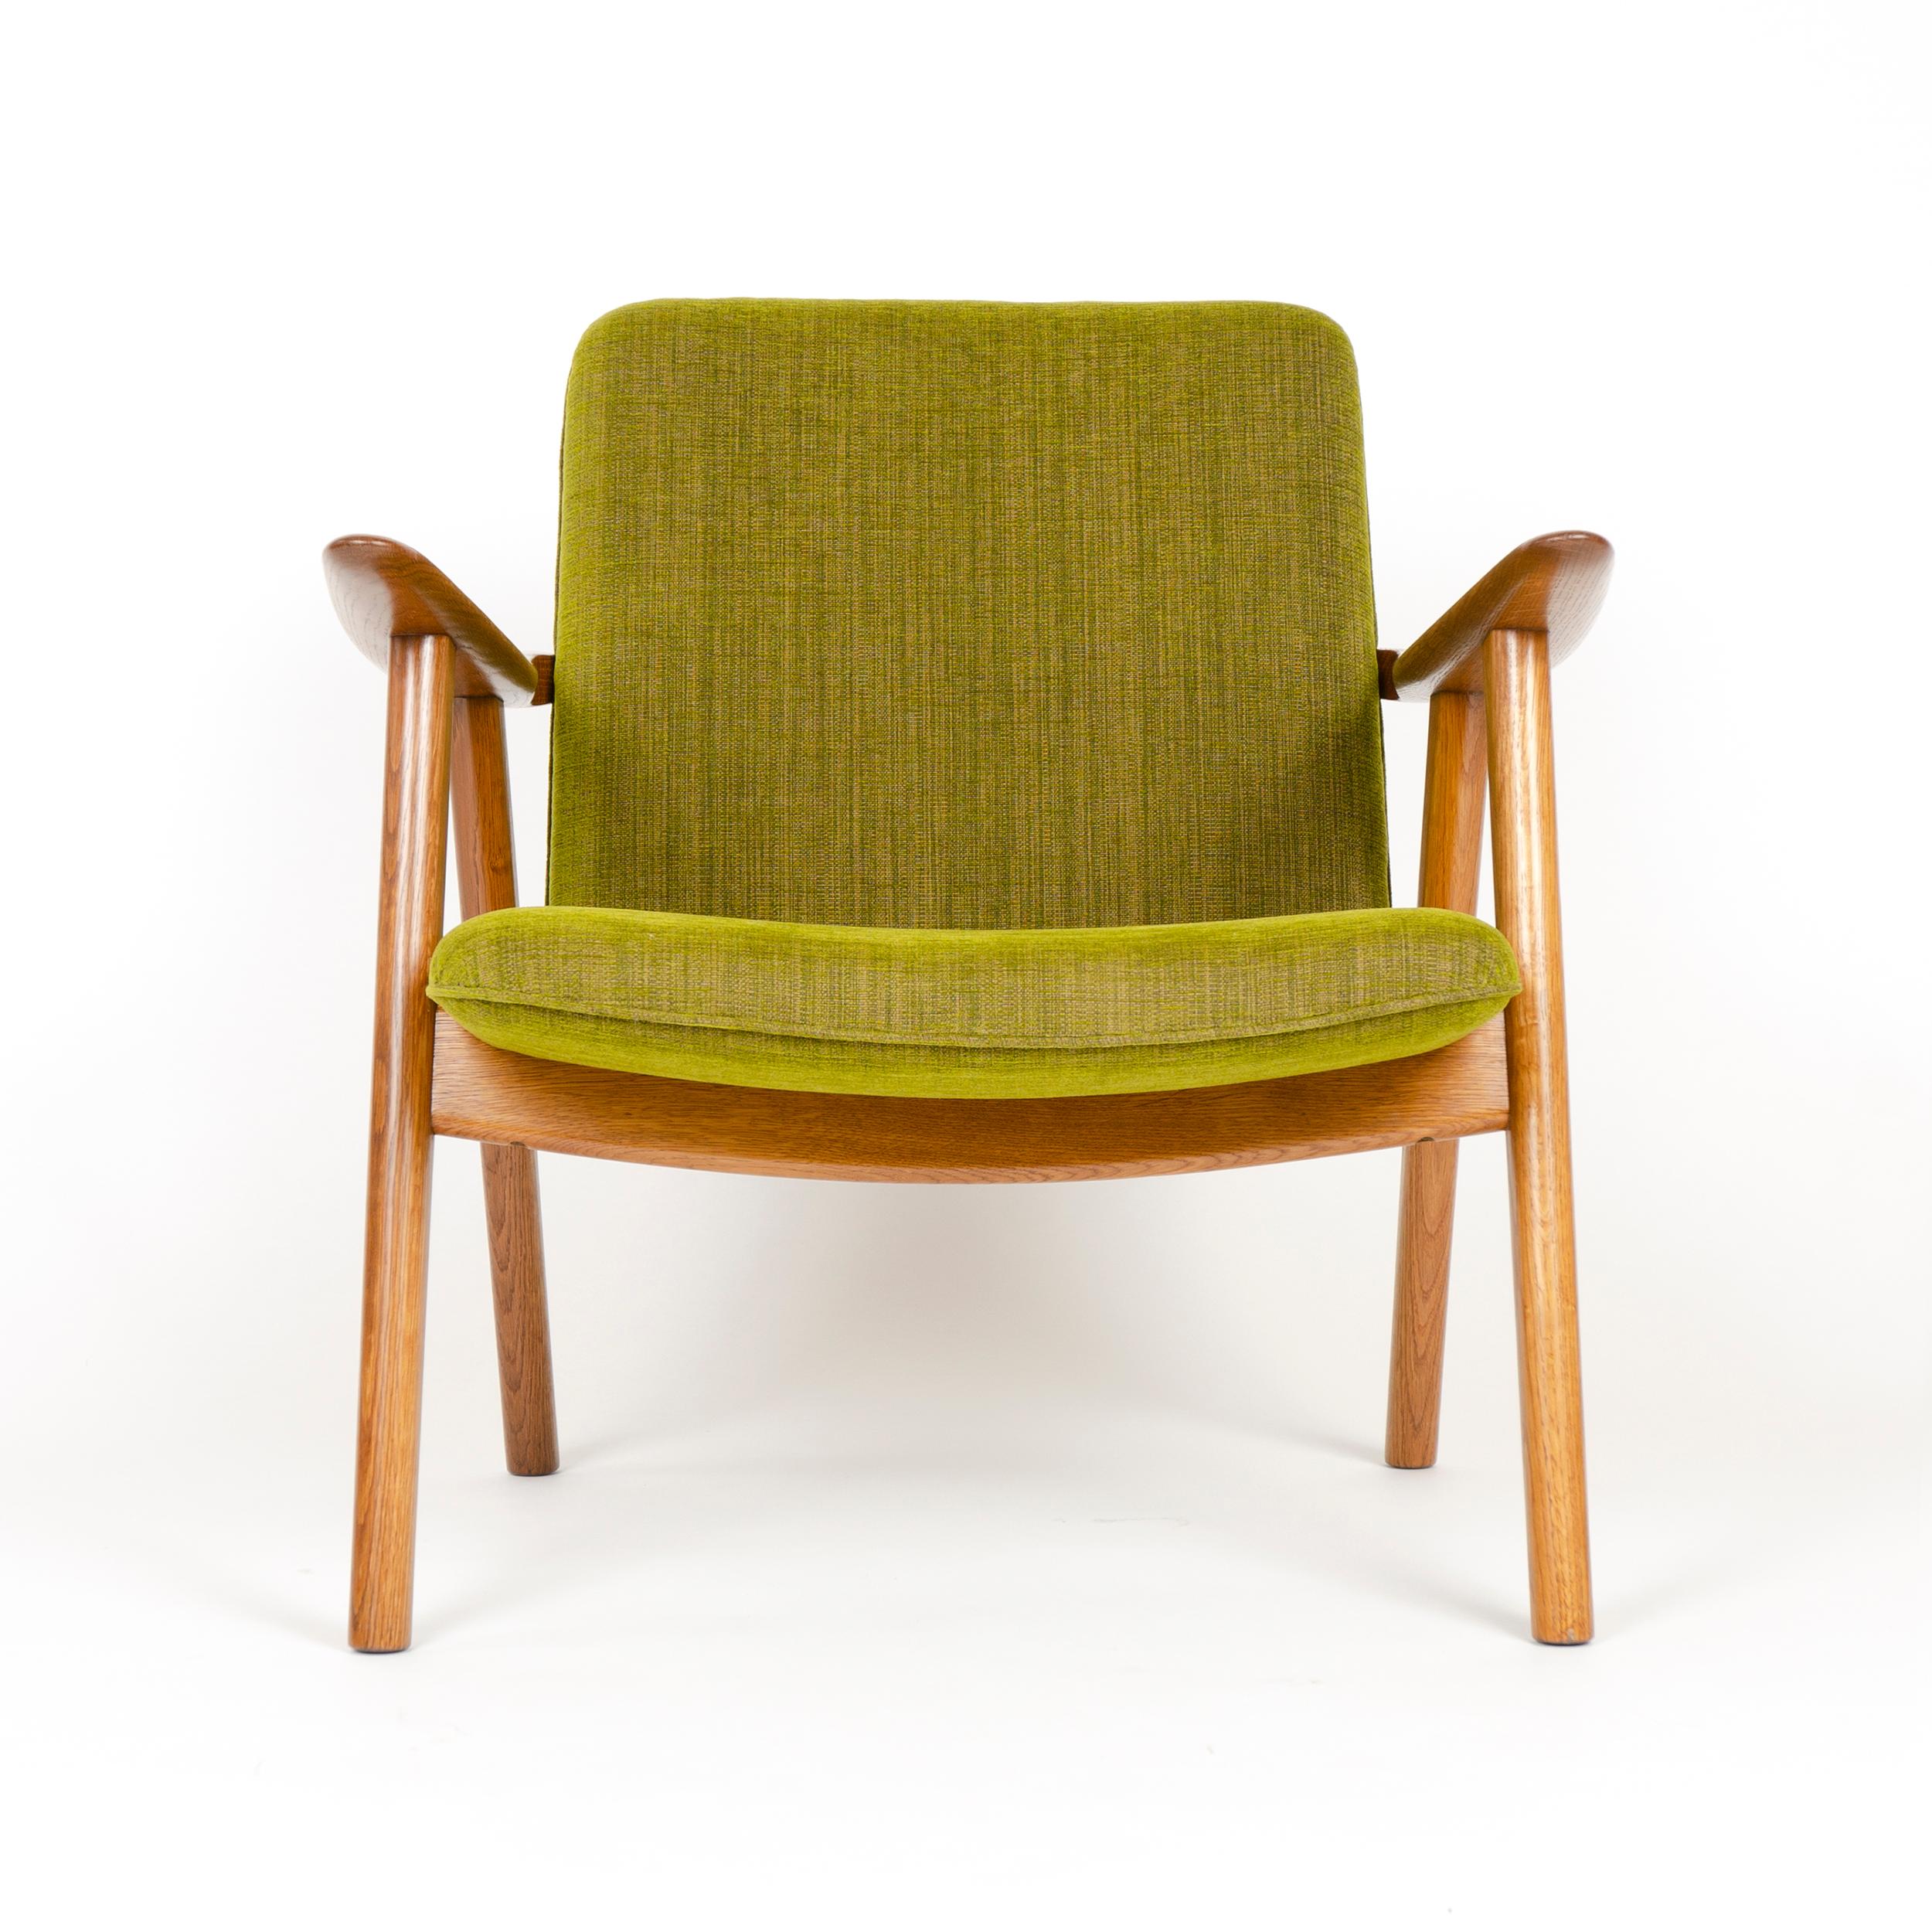 The 'Bukkestolen' (reading chair) with exposed solid oak frame and new internal upholstery and fabric. Priced per chair.